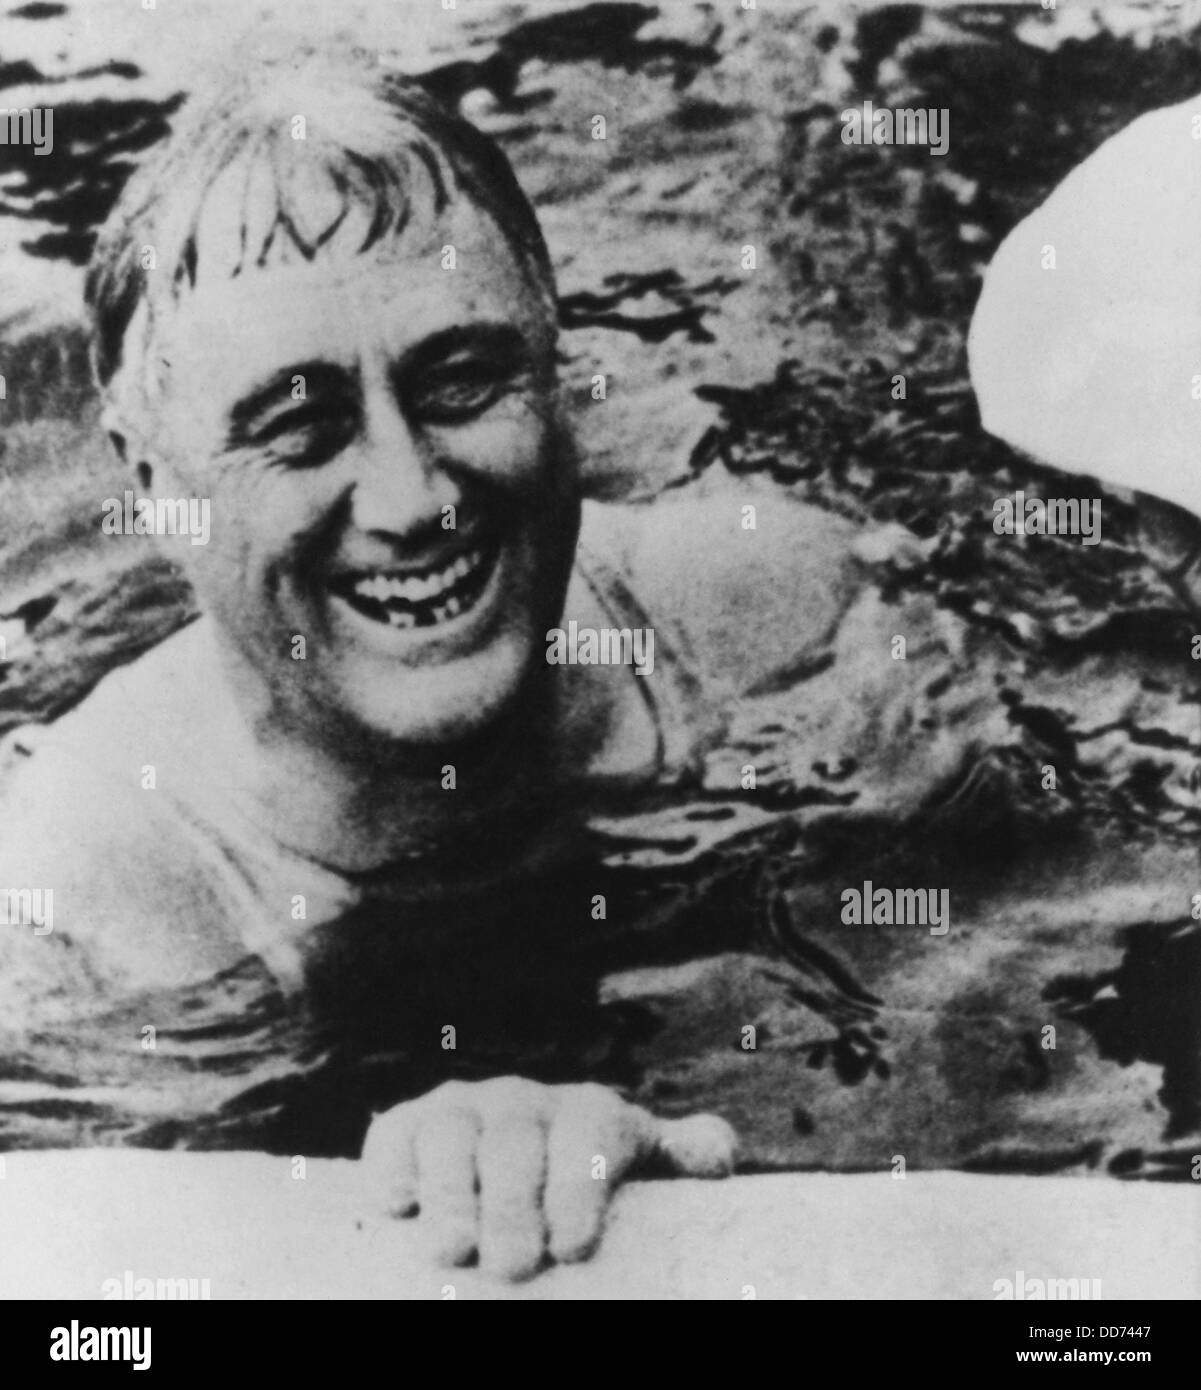 Gov. Franklin Roosevelt swimming in Warm Springs, Georgia. 1930. FDR was then Governor of New York State. (BSLOC 2013 5 62) Stock Photo